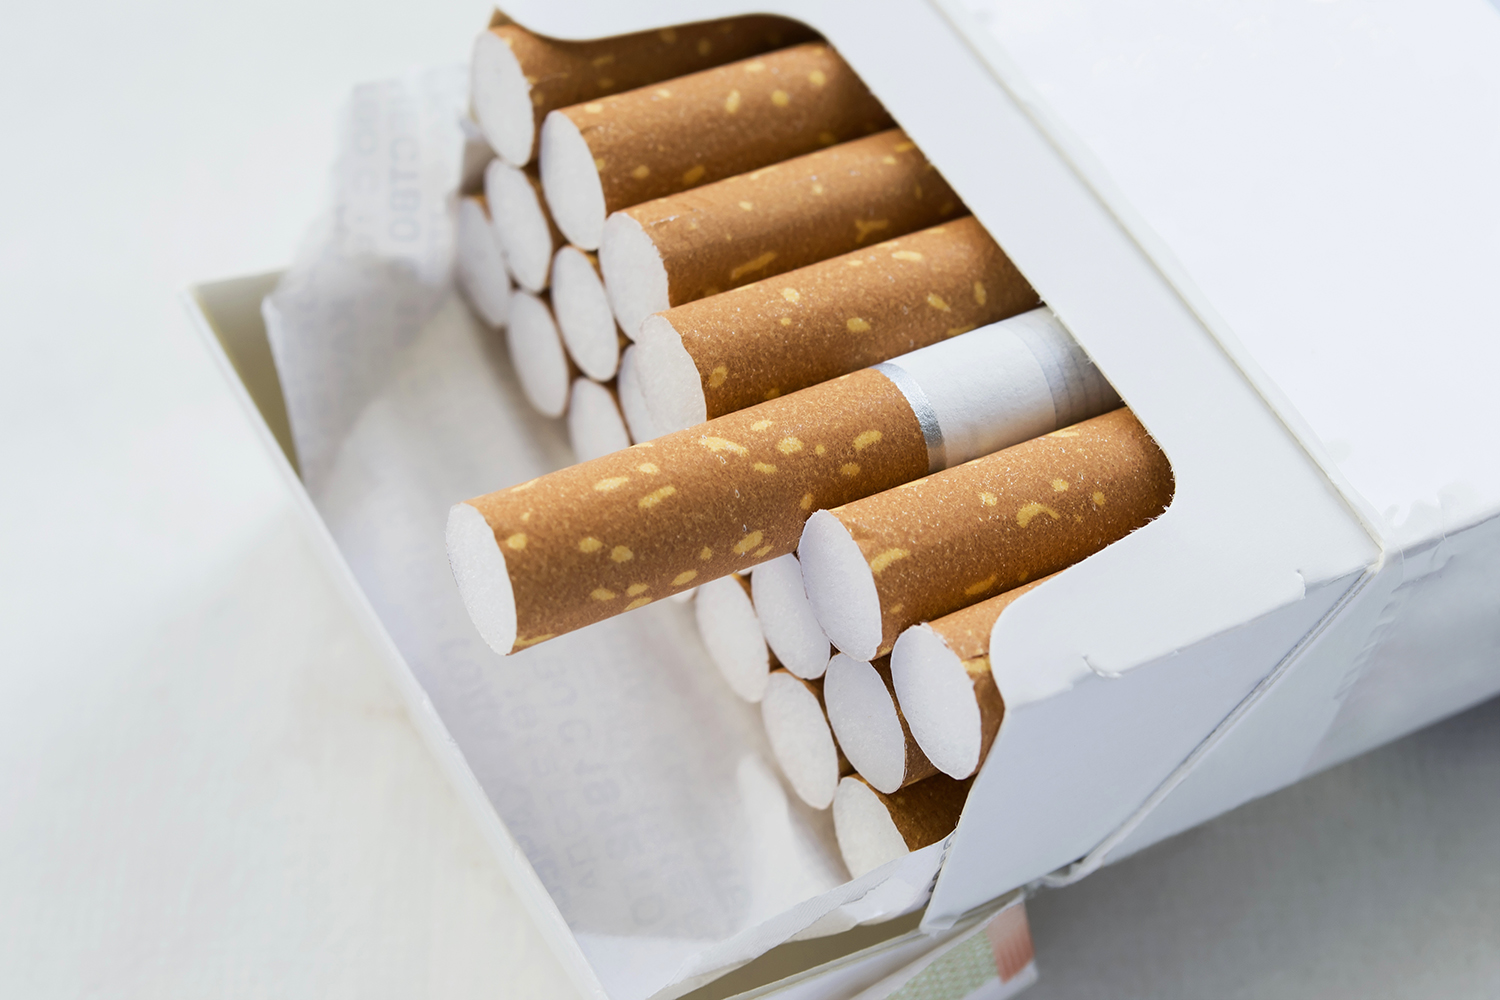 Cigarettes in a pack